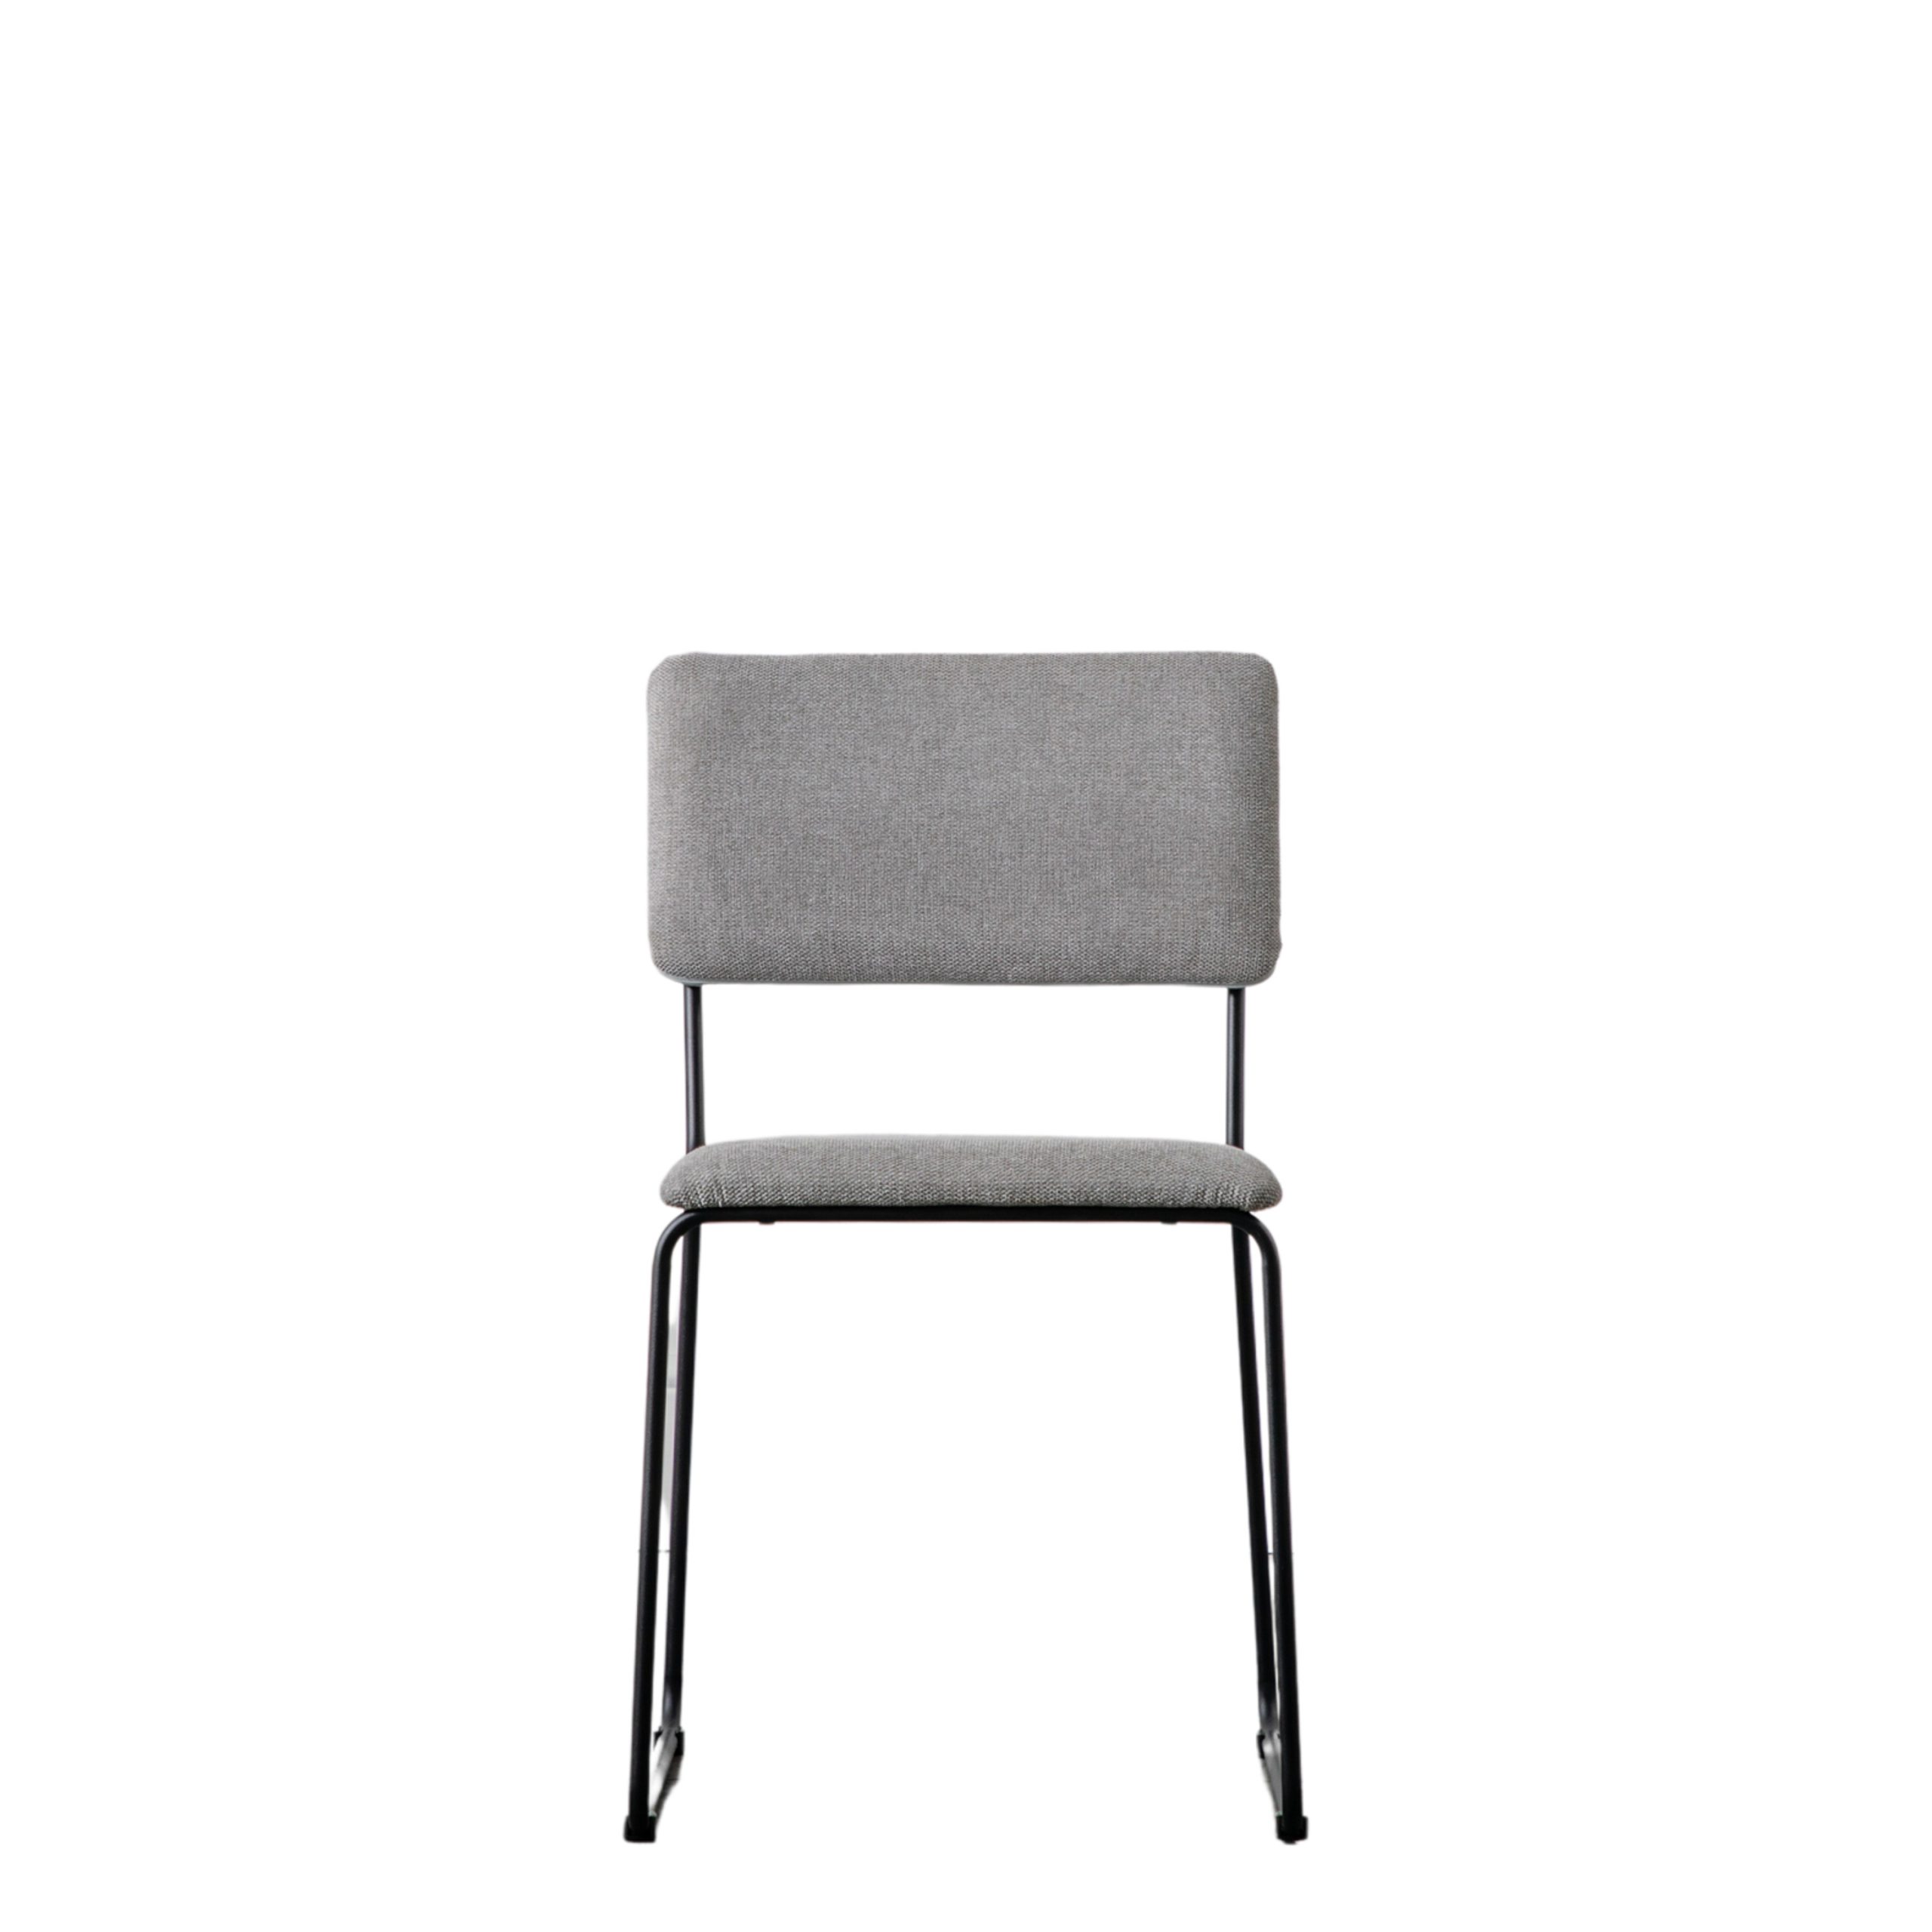 Gallery Direct Chalkwell Dining Chair Light Grey (Set of 2)